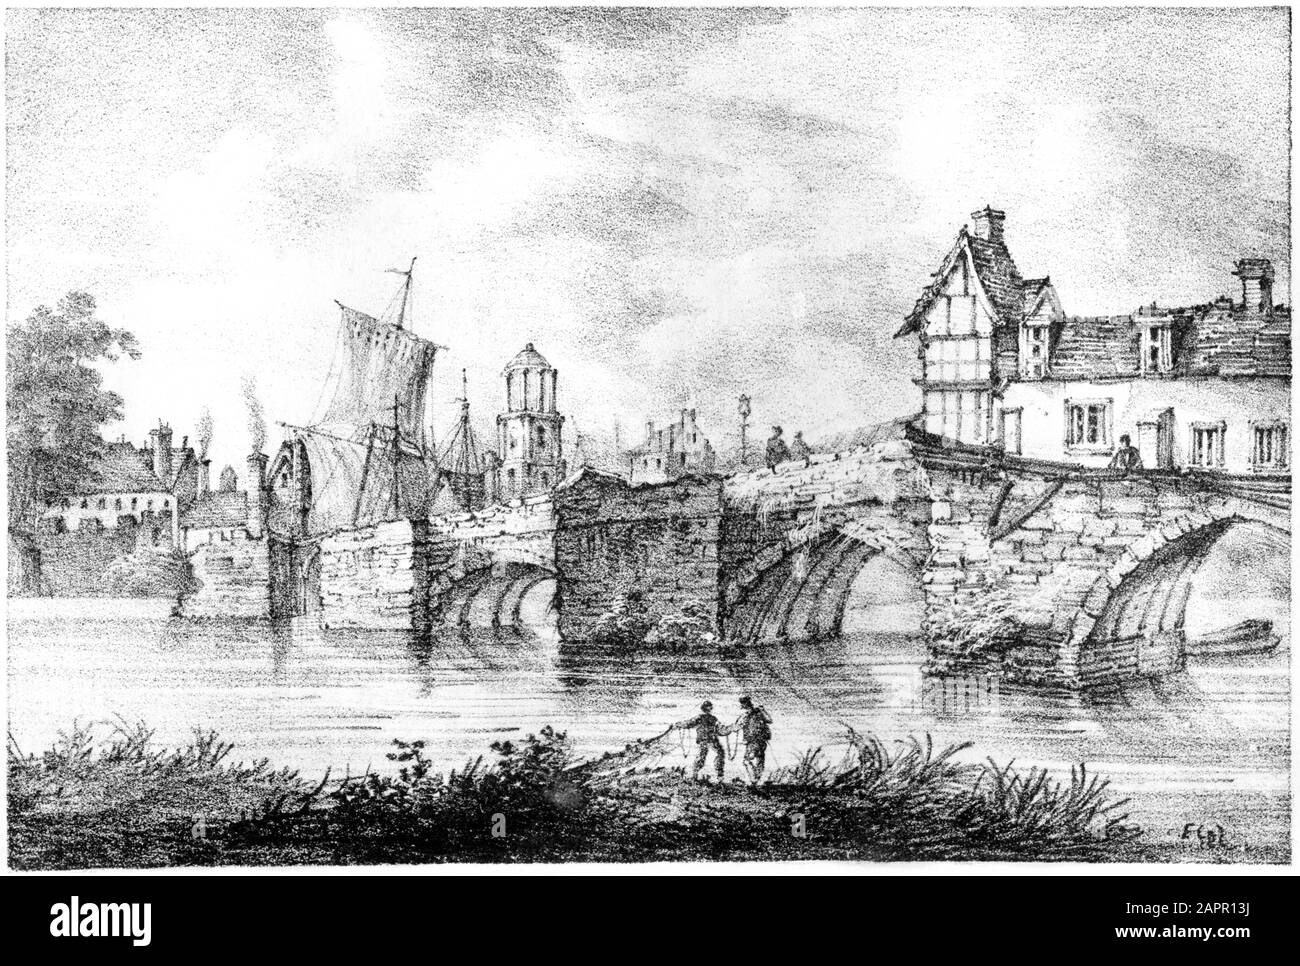 A lithograph of Welch or Welsh Bridge, Shrewsbury scanned at high resolution. from a book printed in 1824. Believed copyright free. Stock Photo